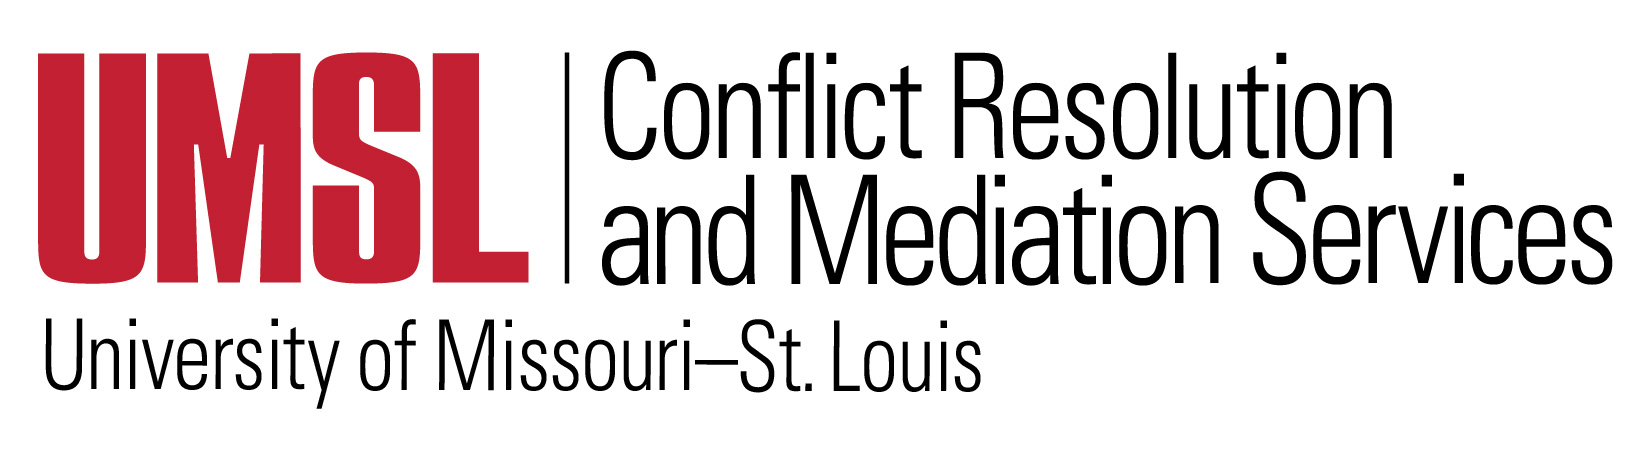 Conflict Resolution and Mediation Services logotype